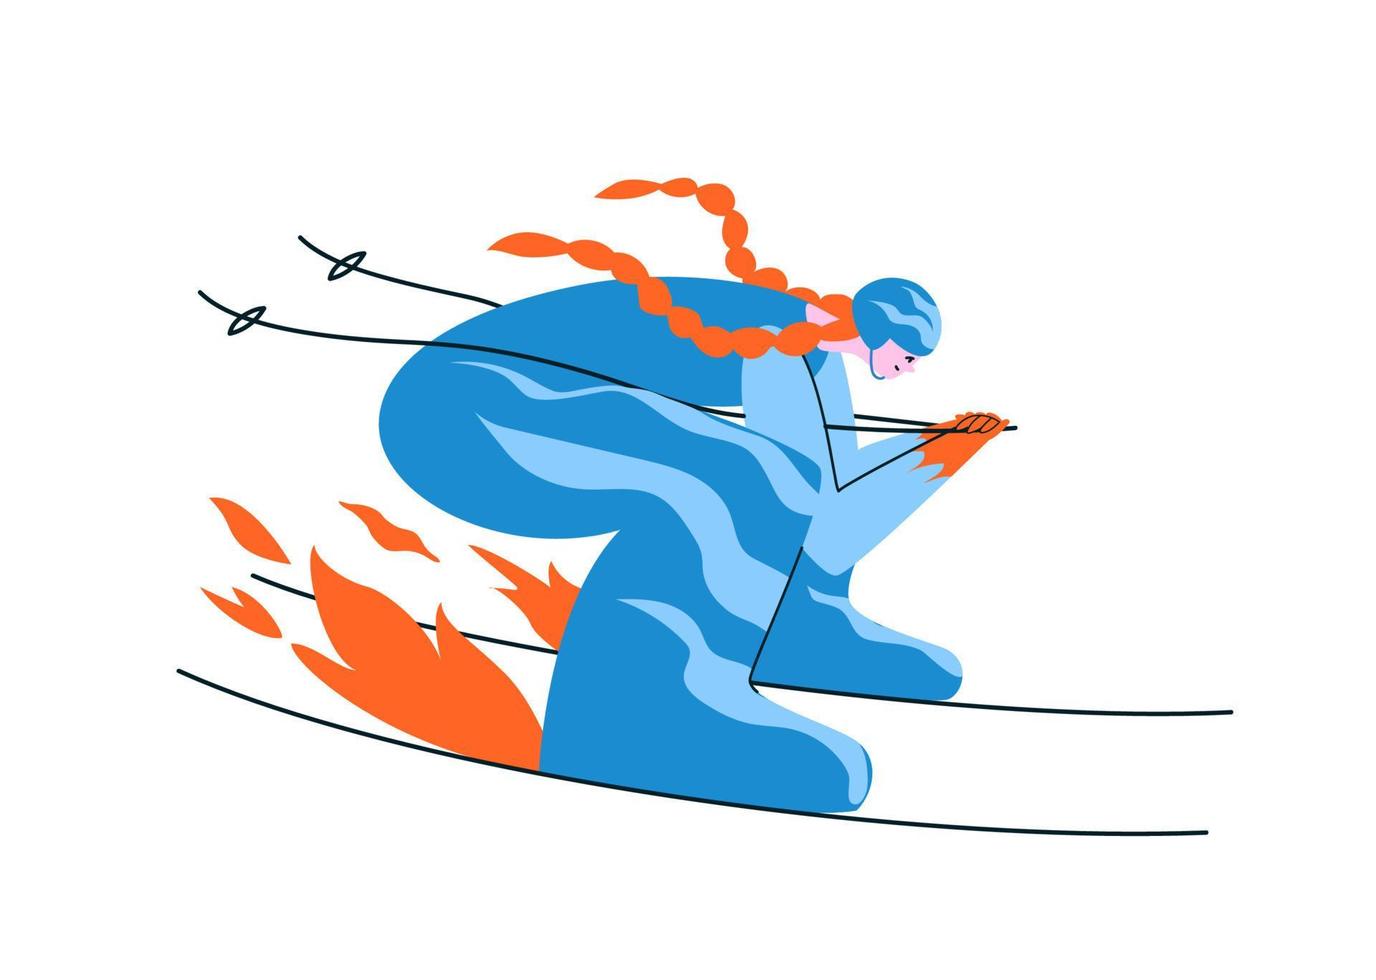 Hand-drawn redhead girl skier in a blue suit. A young woman skis in an aerodynamic pose at full speed that the fire under the skis lights up. Vector stock illustration in cartoon style on white.